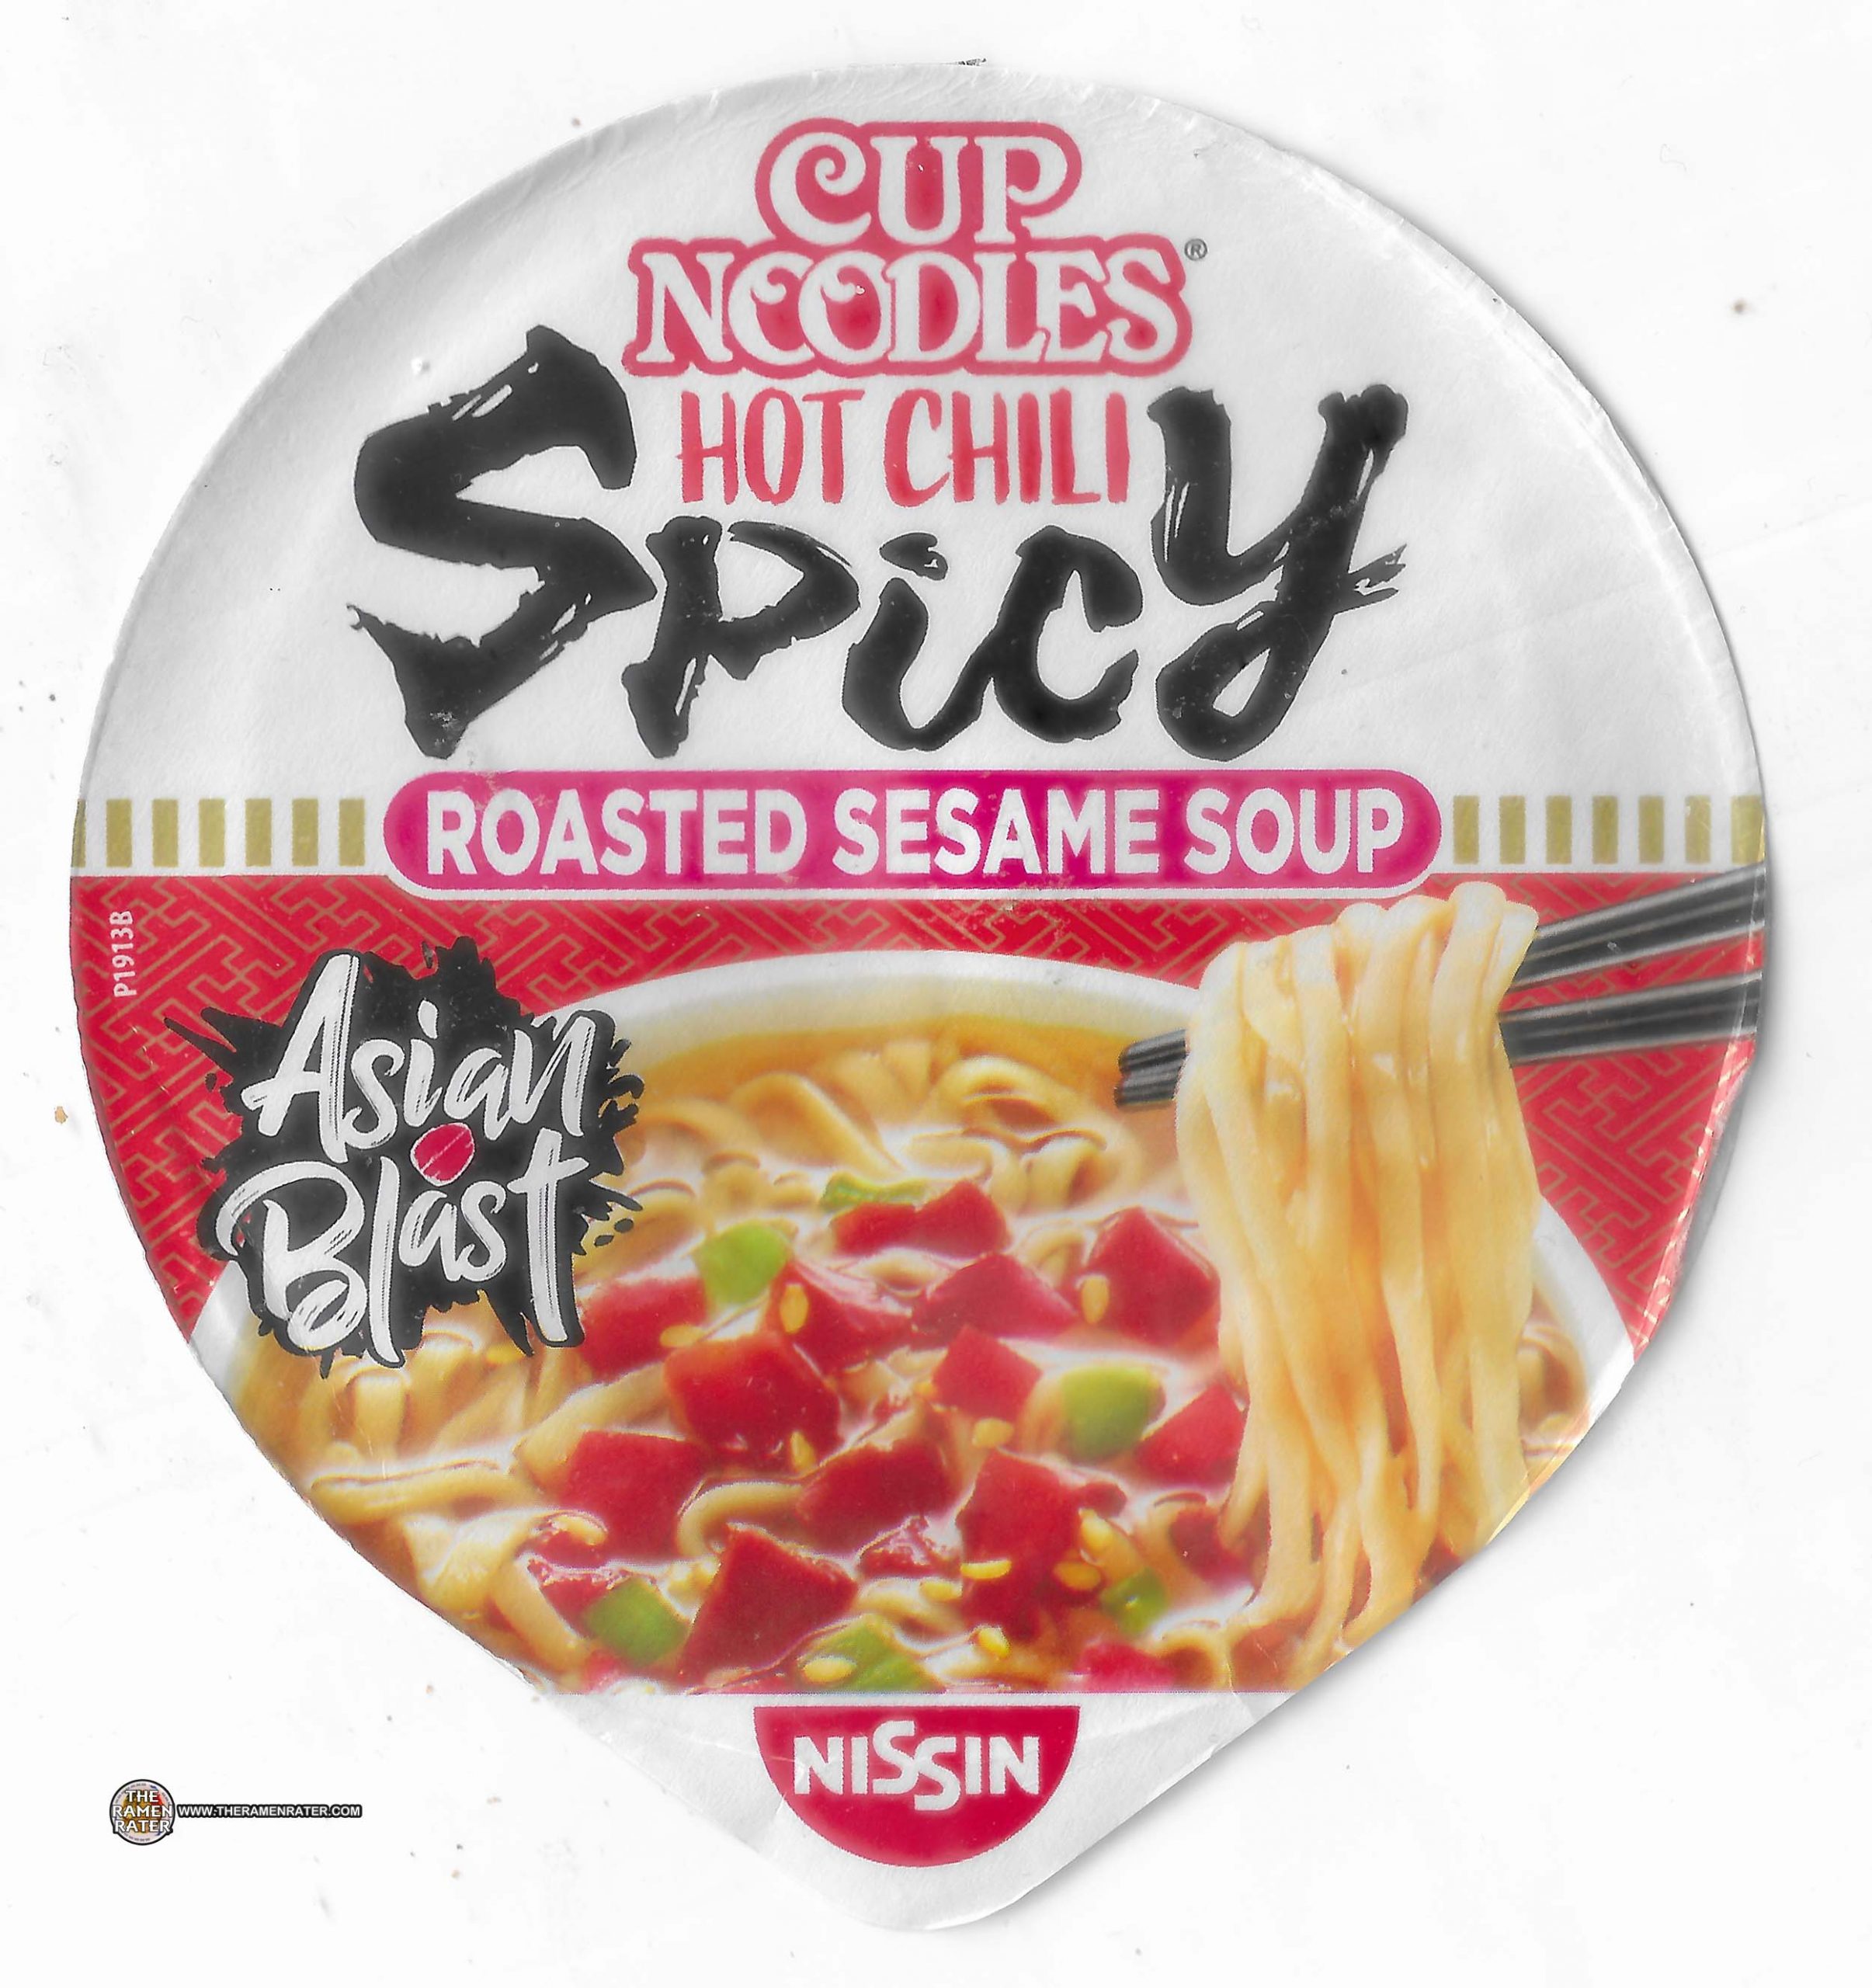 Nissin Cup Noodles Hot Chili Spicy Roasted Sesame Soup - Hungary.